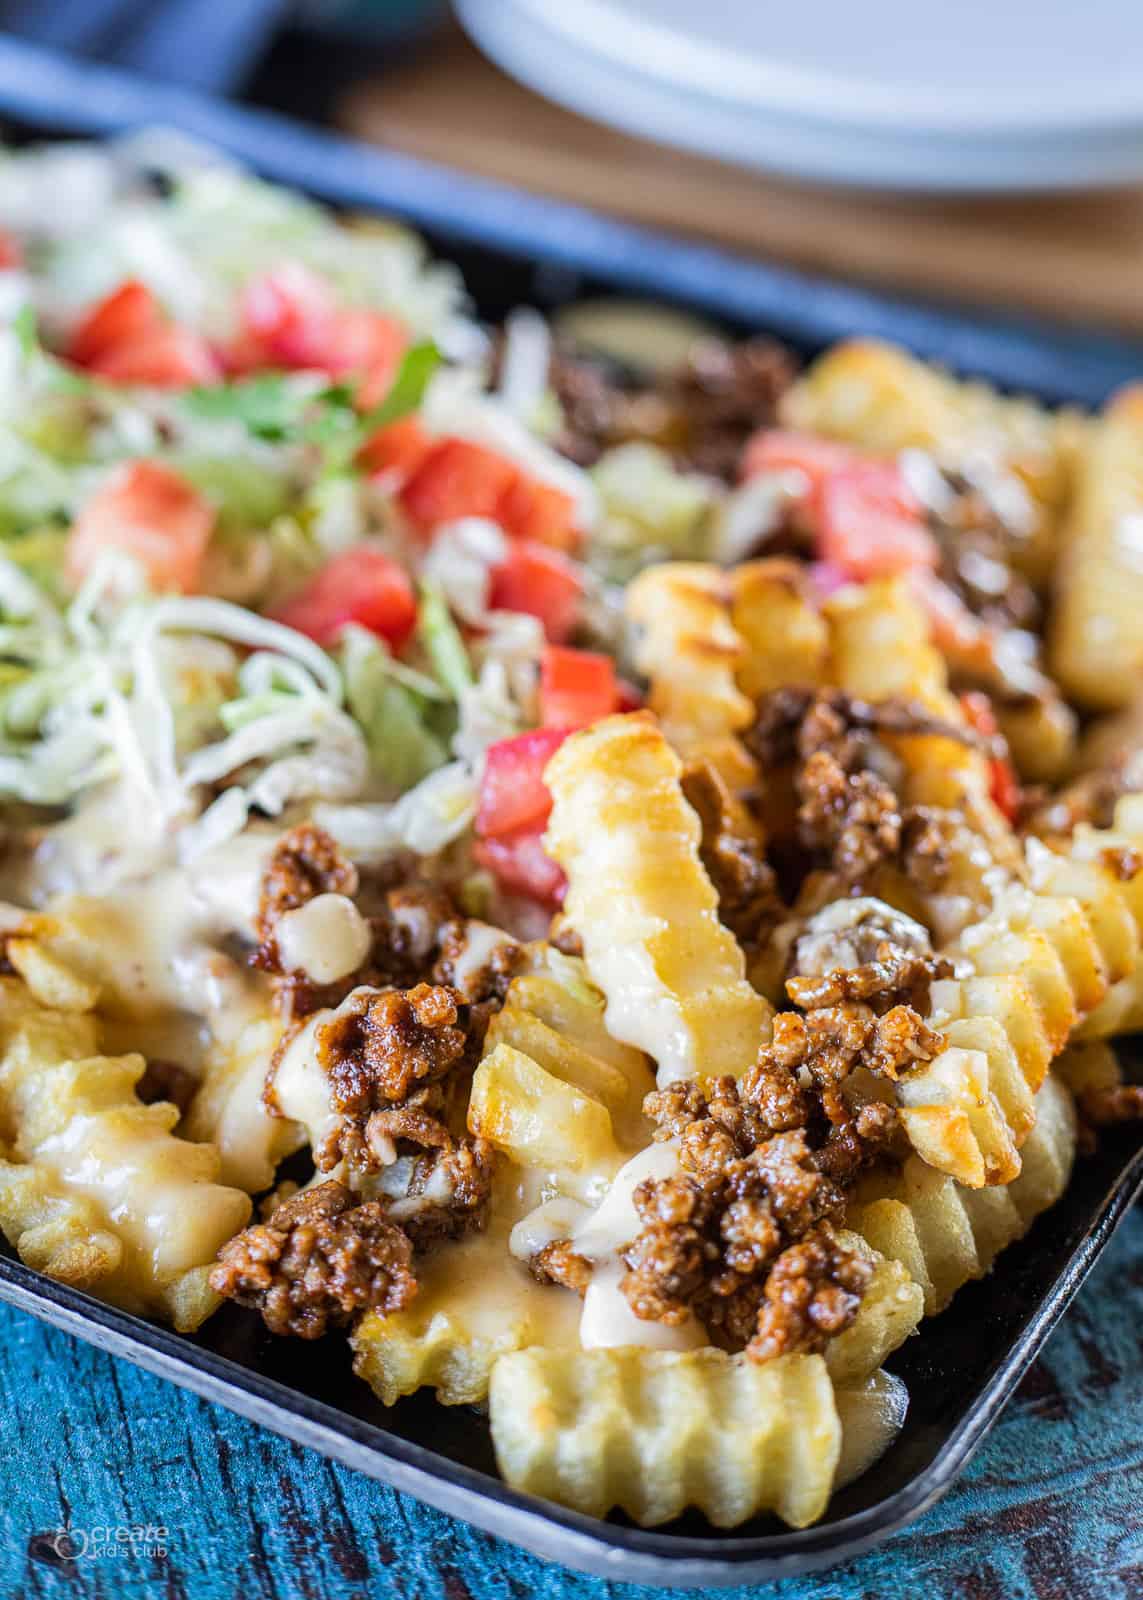 fries topped with taco meat and toppings